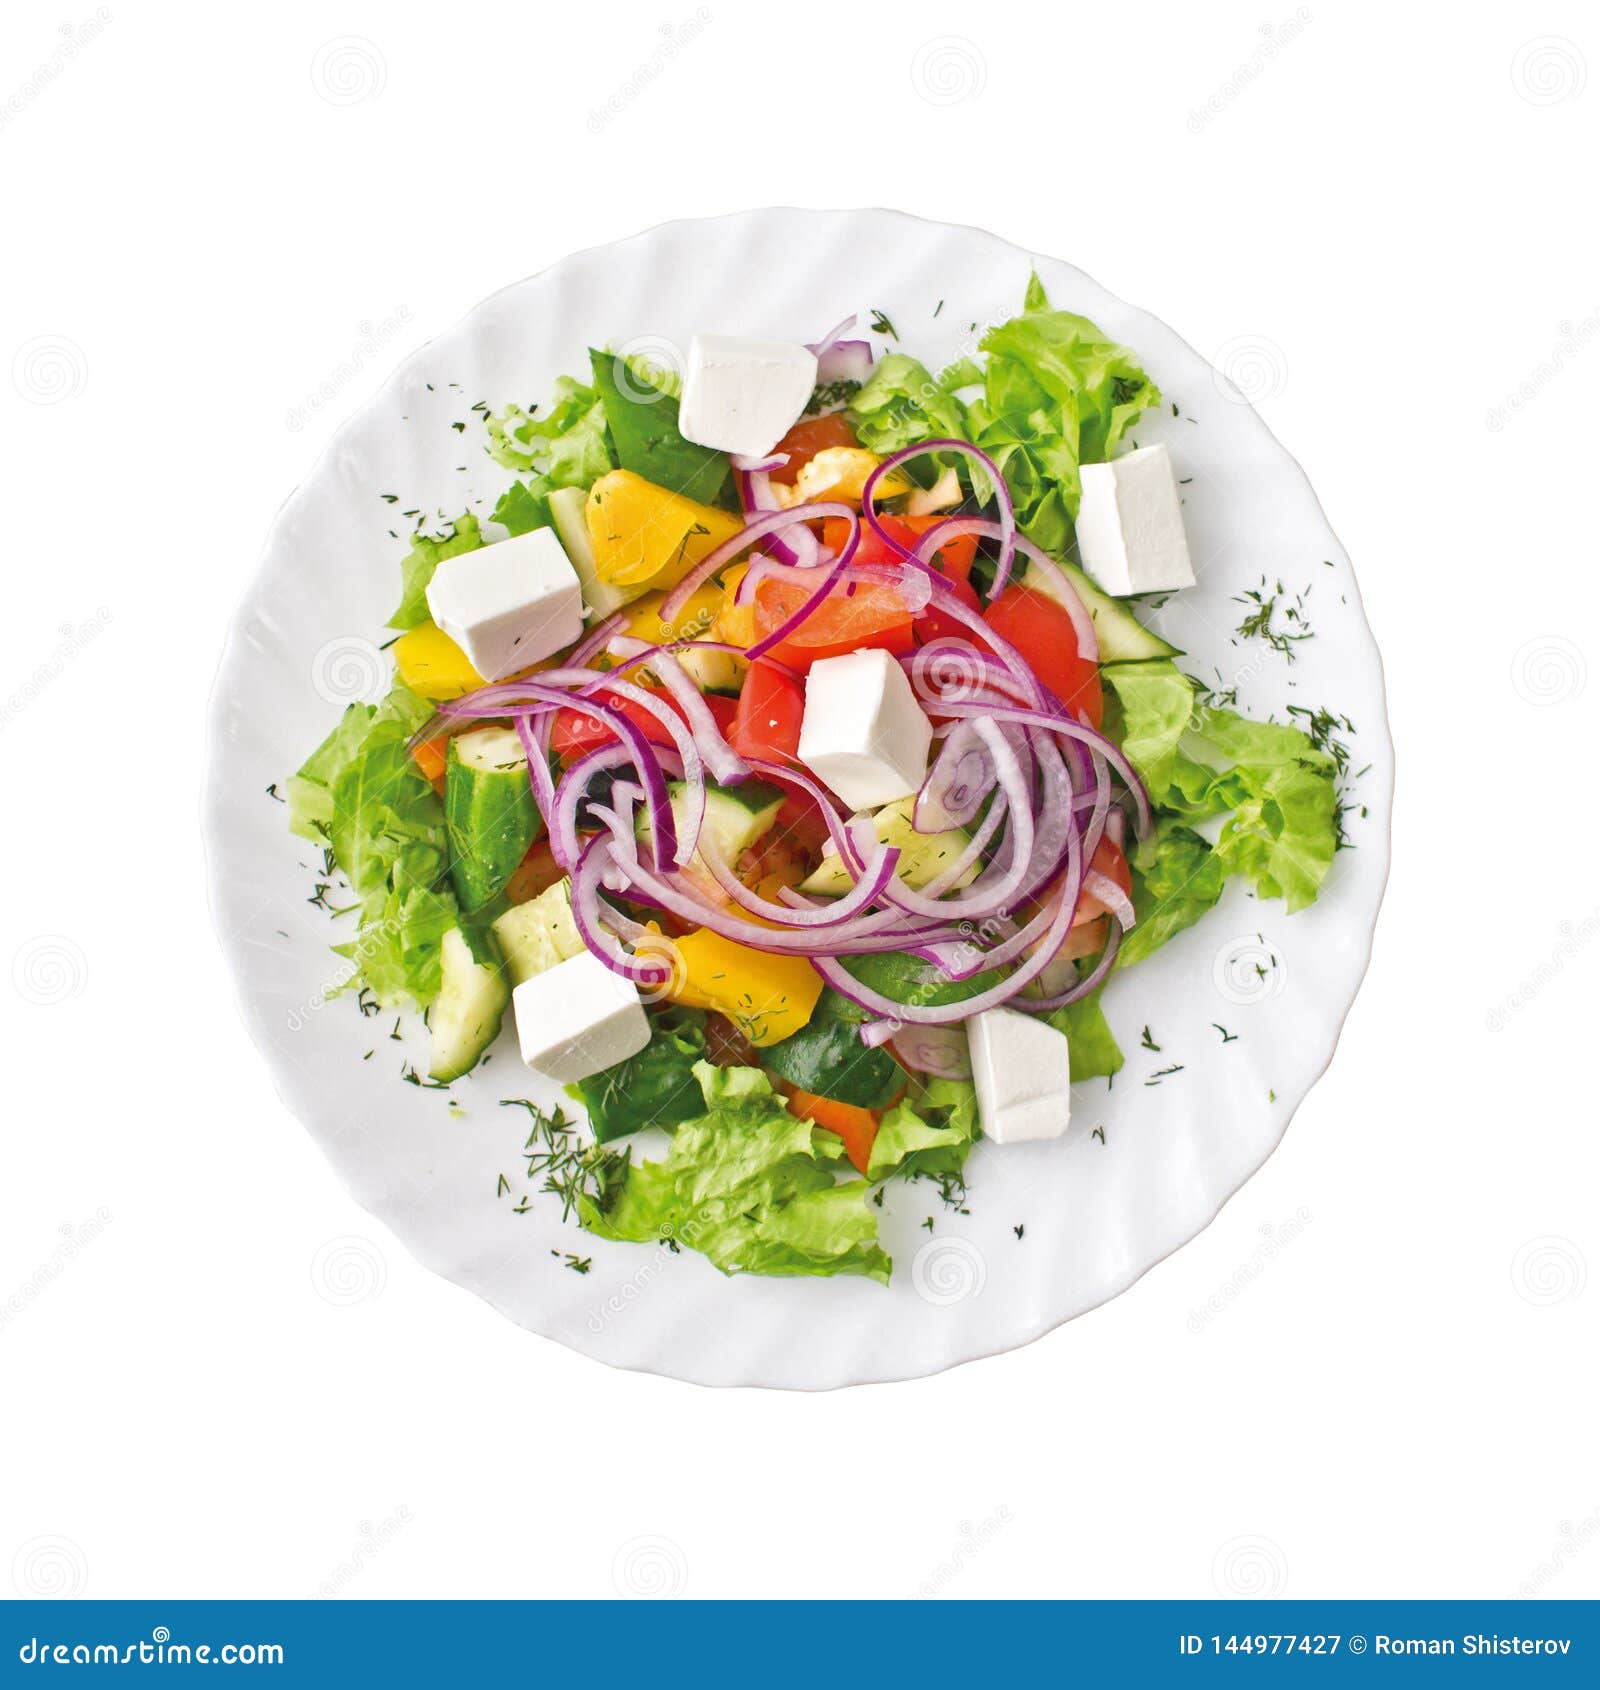 greek salad on a plate,  on white background. top view.